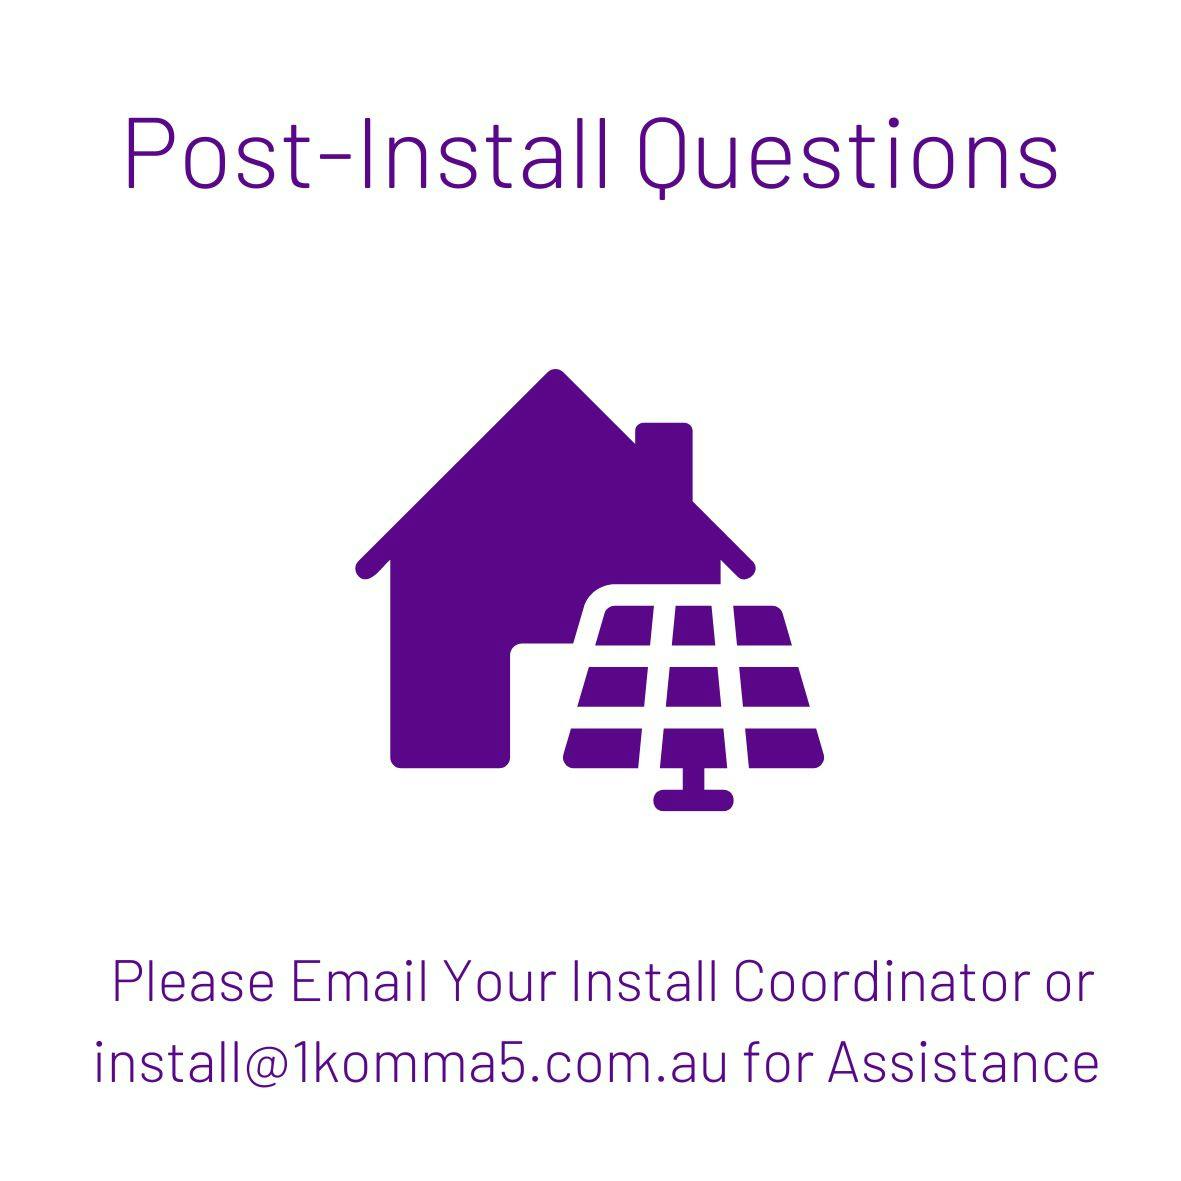 Post-Install Questions